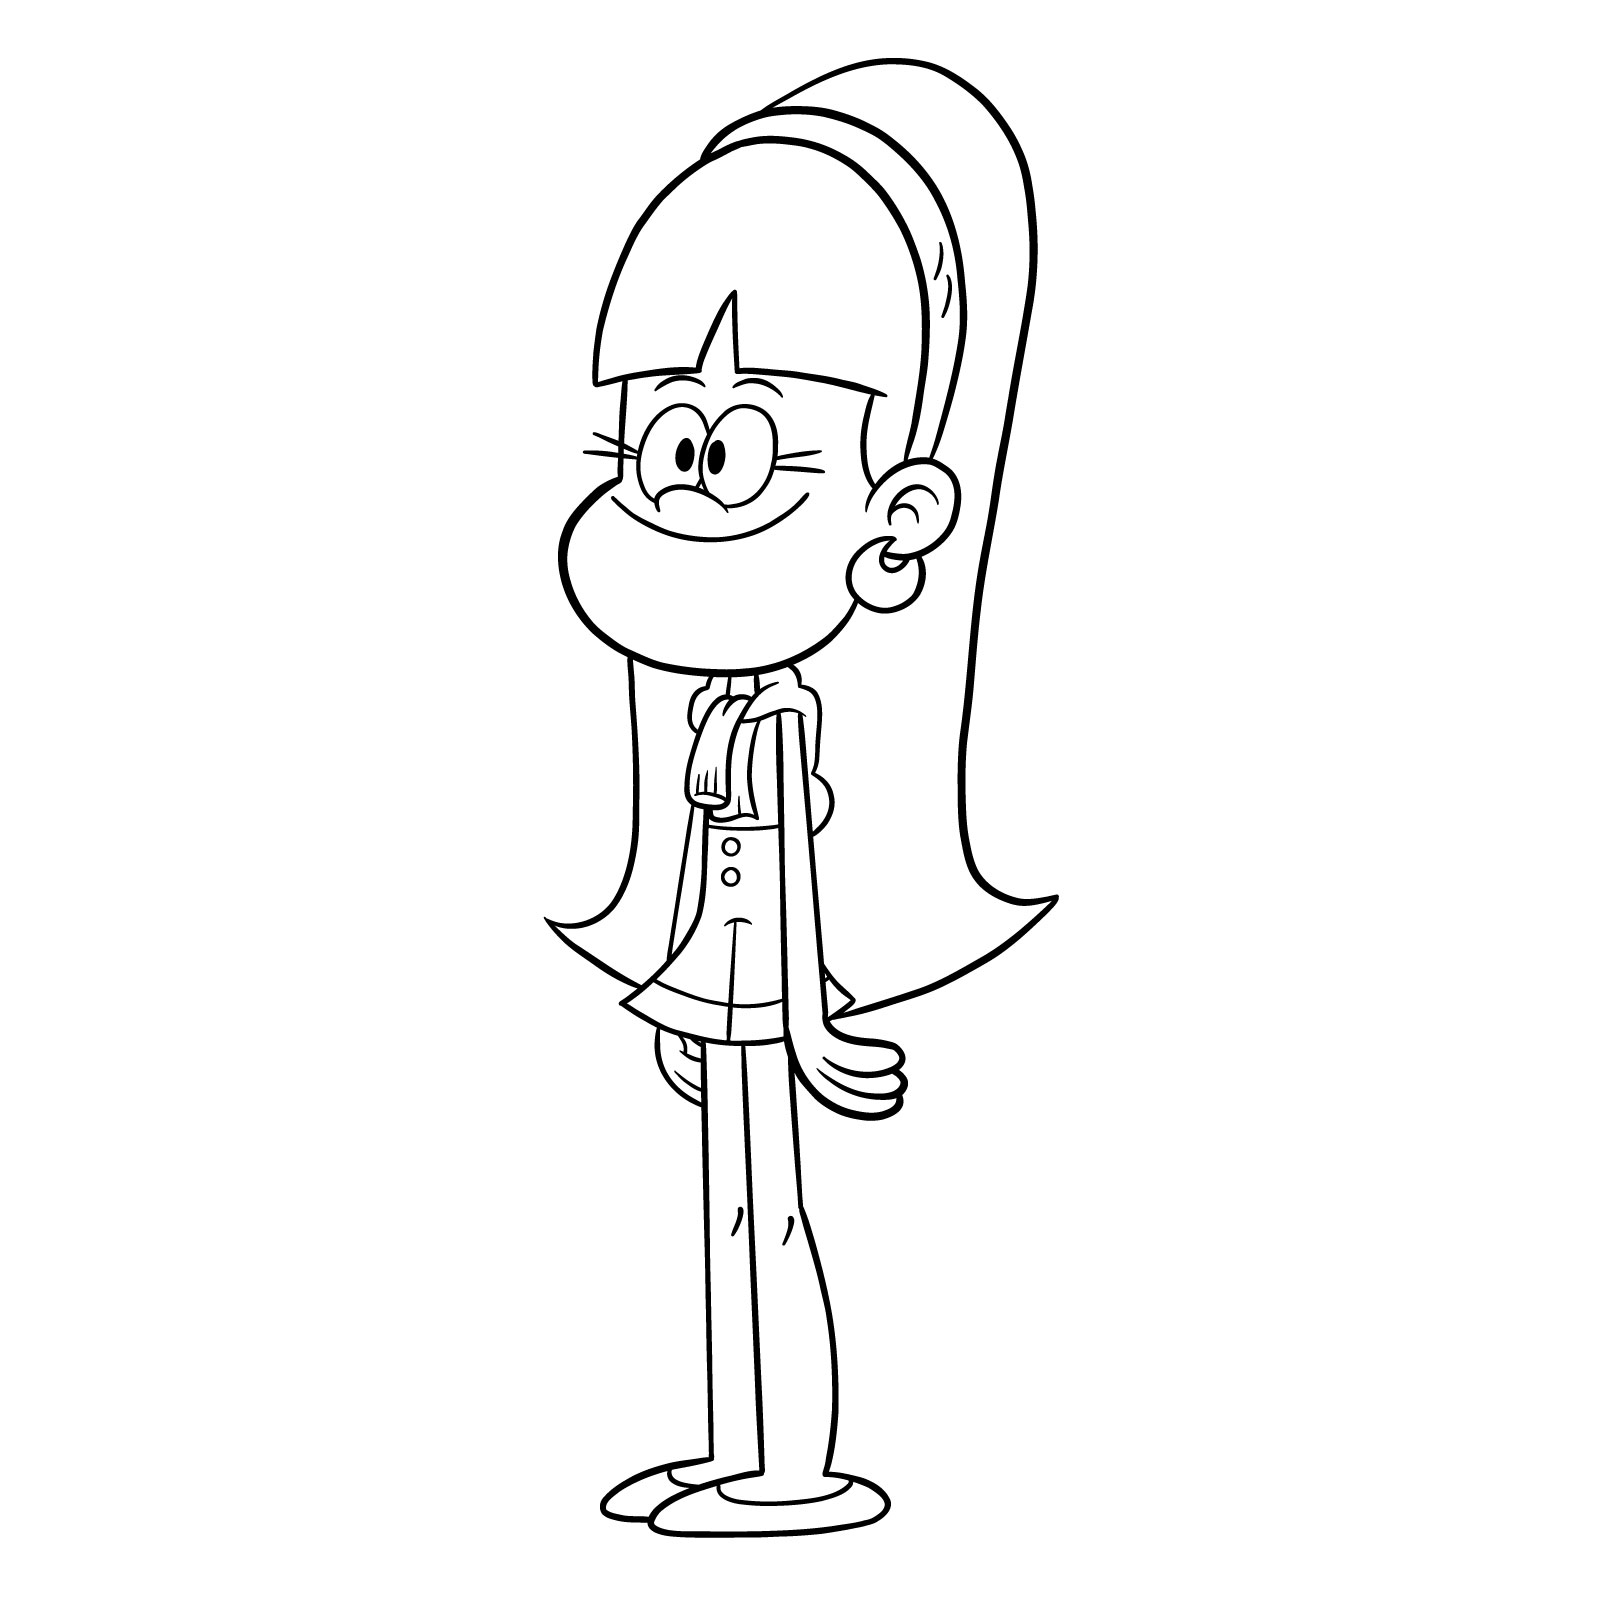 How to draw Beatrix (The Loud House) - final step